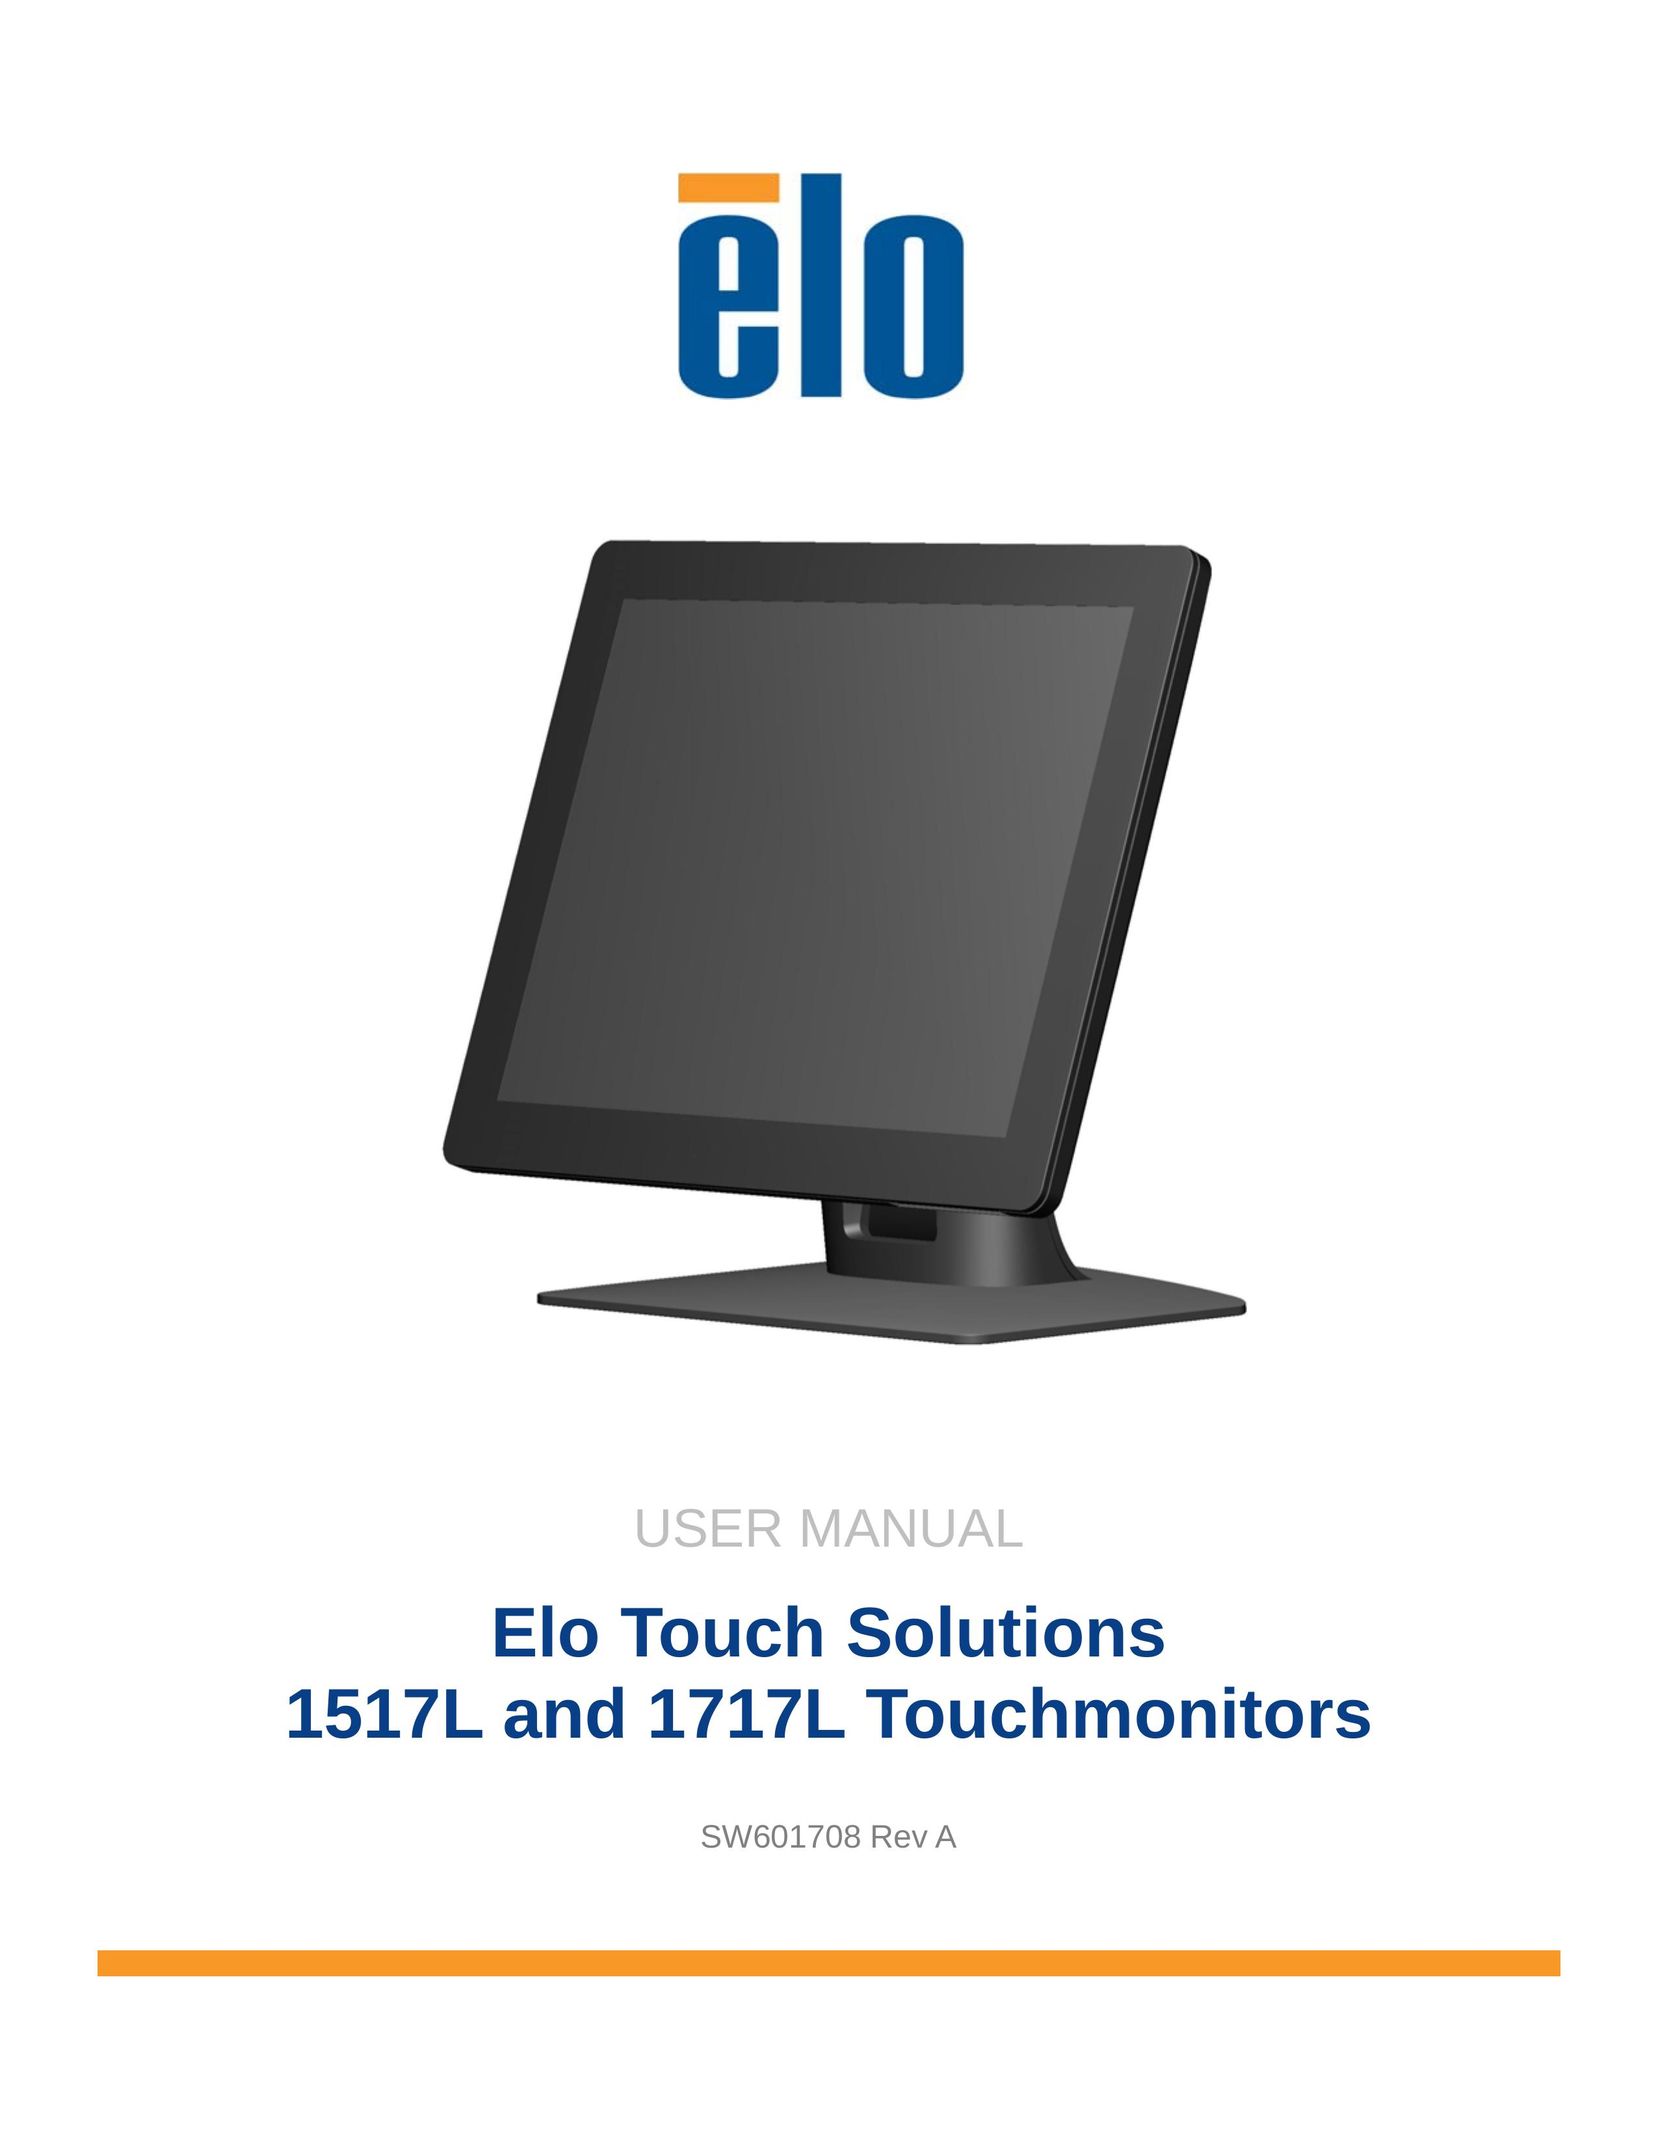 Elo TouchSystems 1717L Computer Monitor User Manual